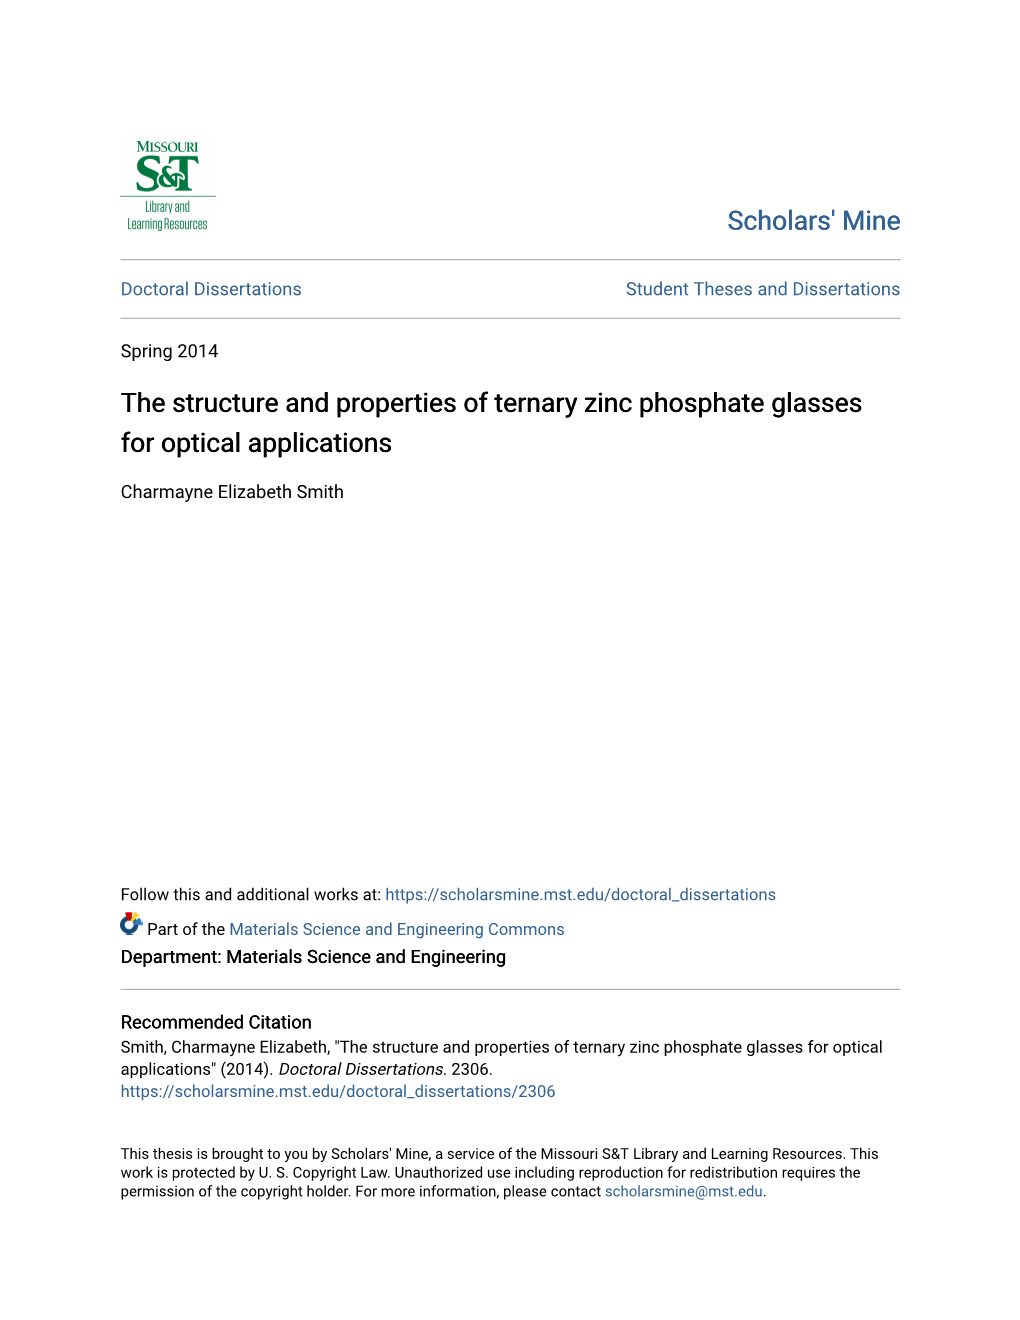 The Structure and Properties of Ternary Zinc Phosphate Glasses for Optical Applications